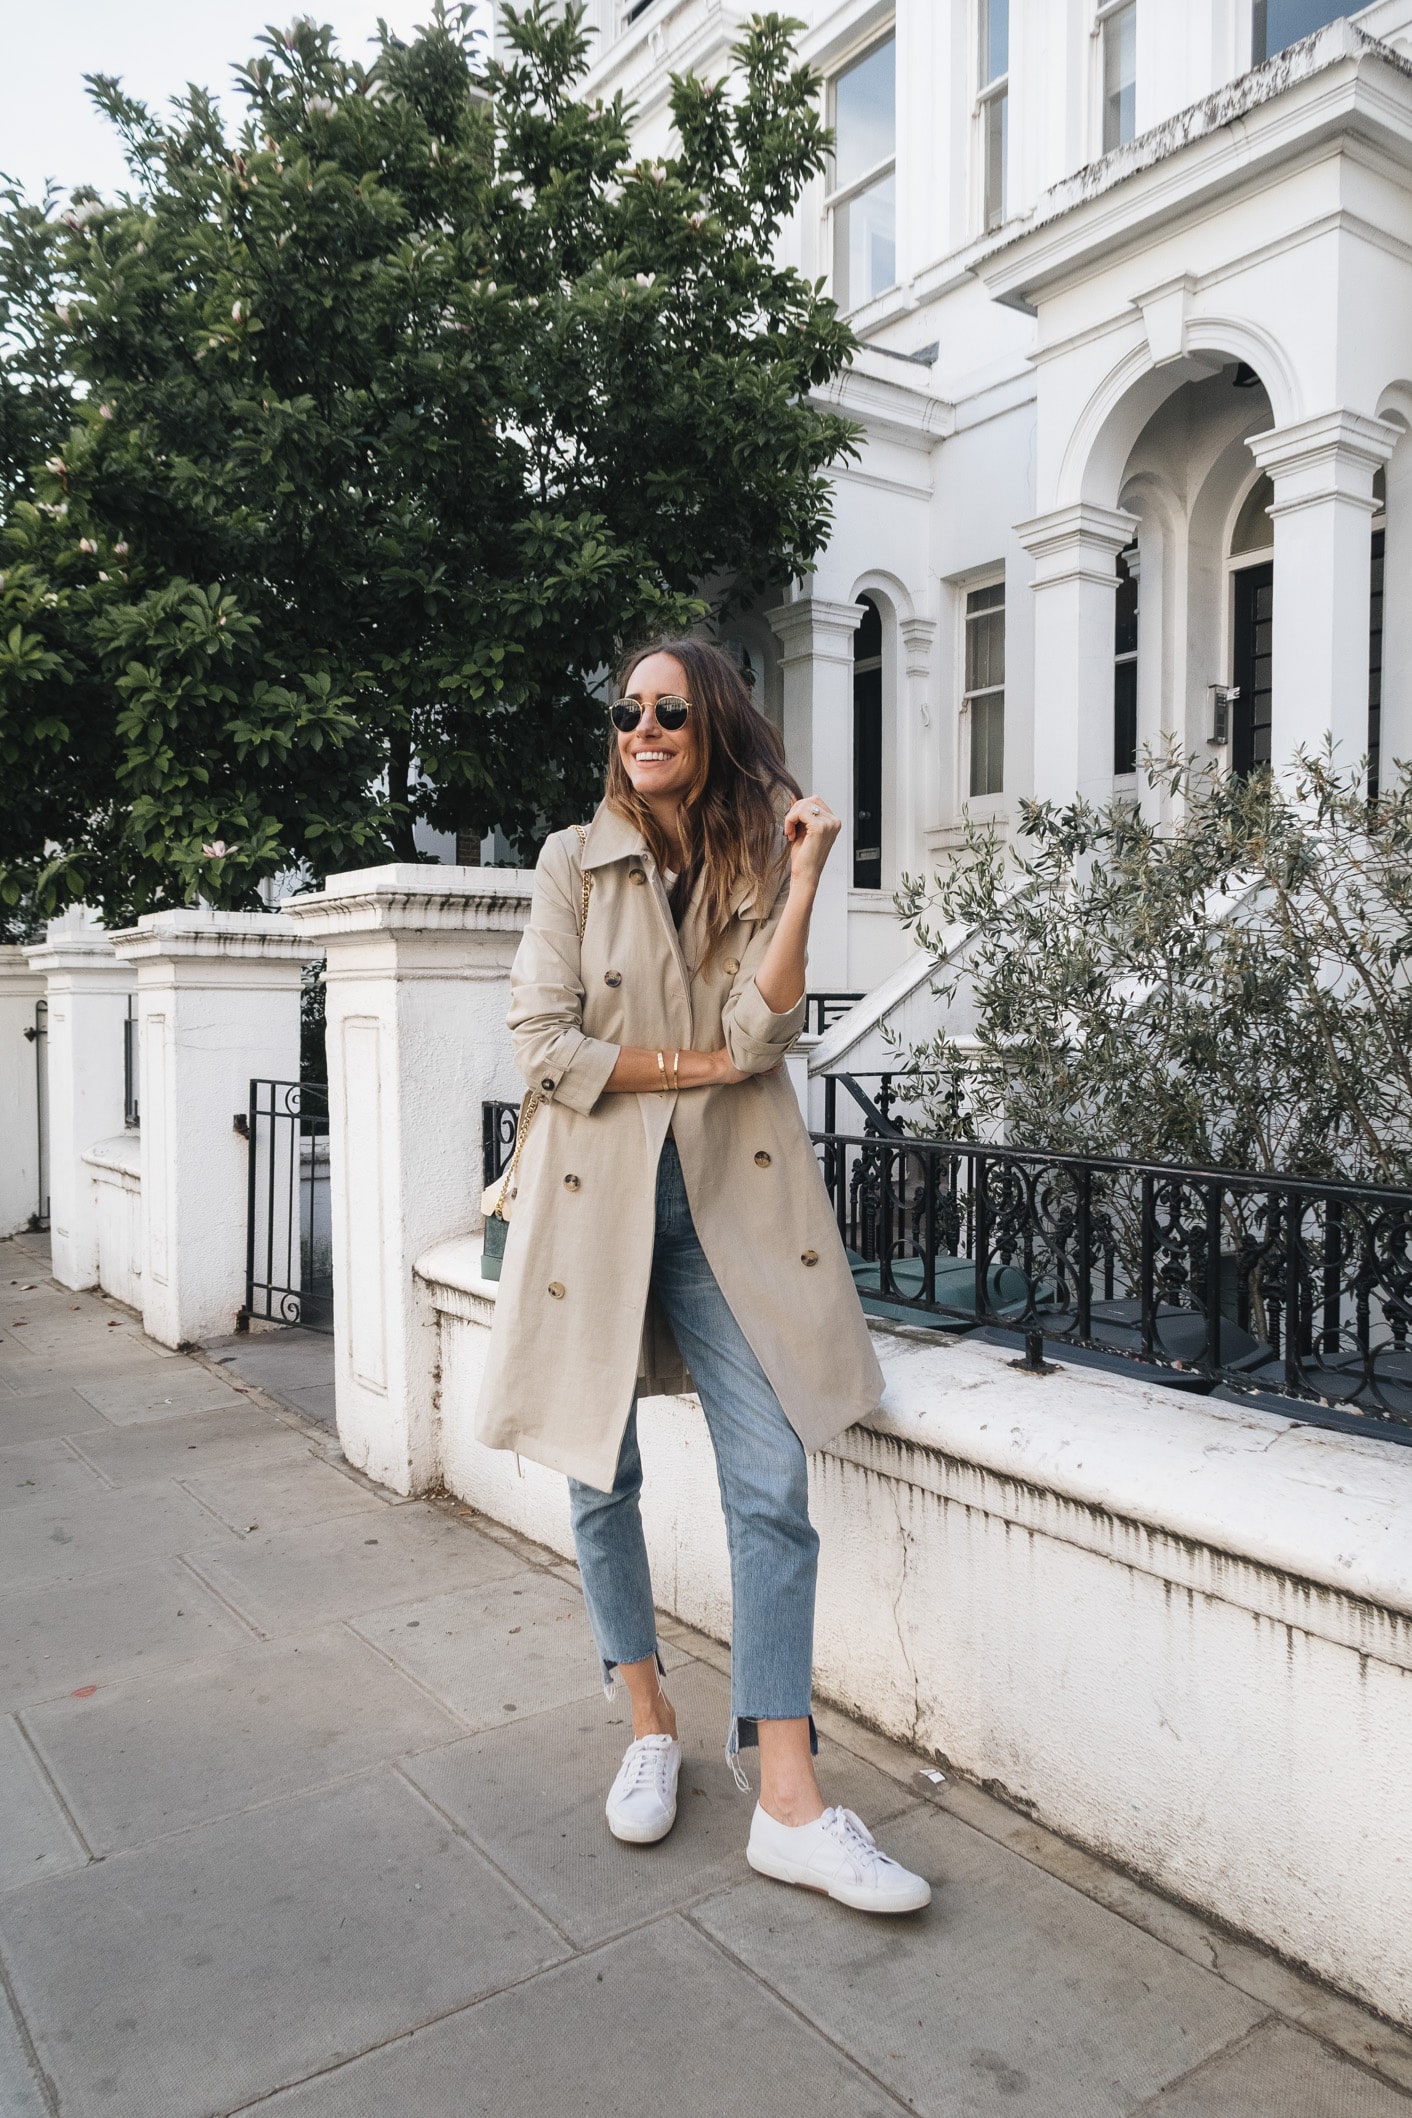 Louise Roe wearing a classic trench coat jeans and white sneakers in London